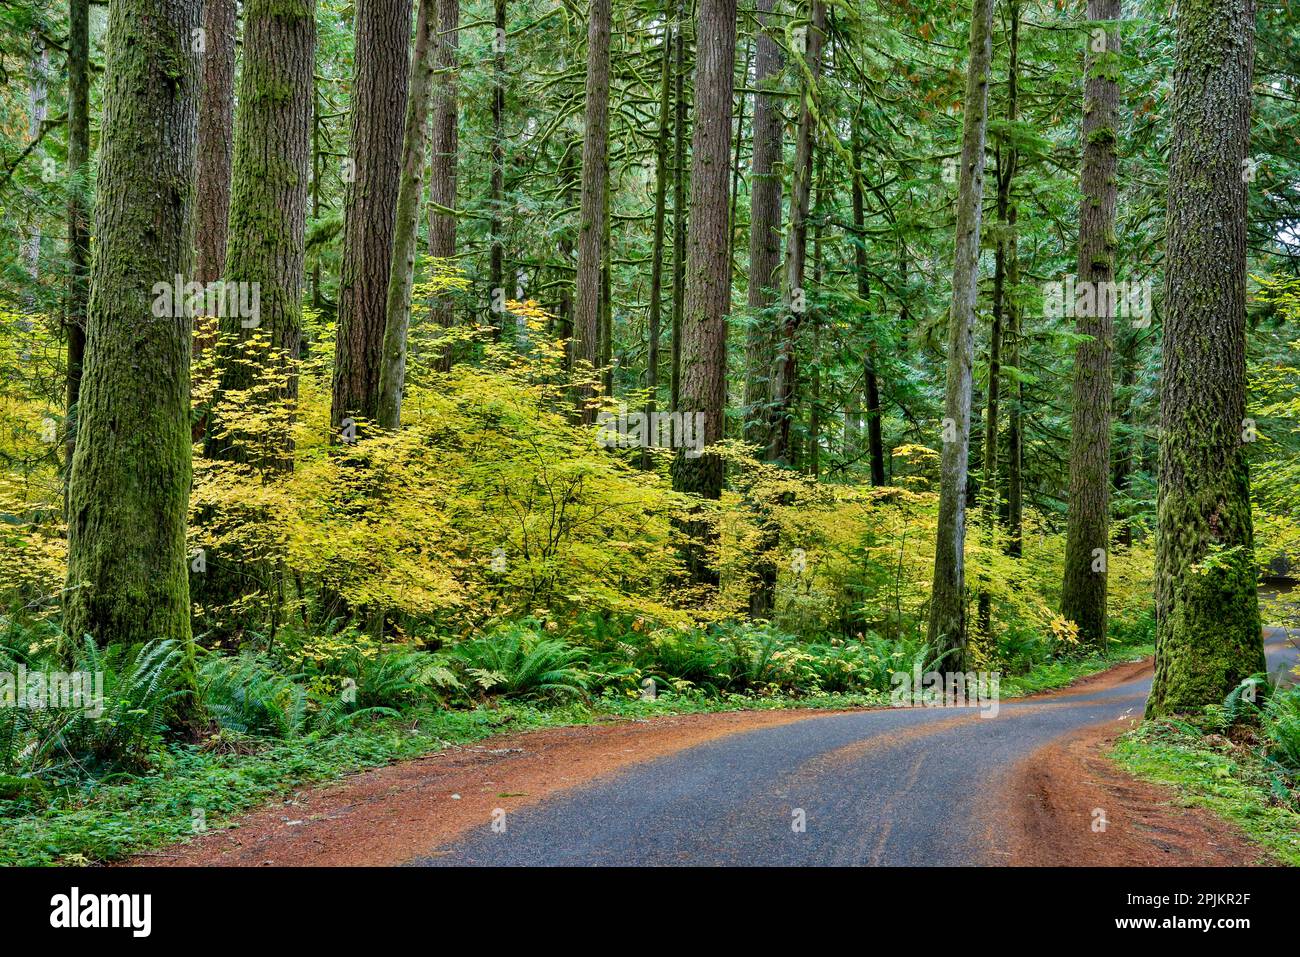 USA, Washington State, Darrington. Curved roadway in autumn forest of fir and vine maple trees Stock Photo